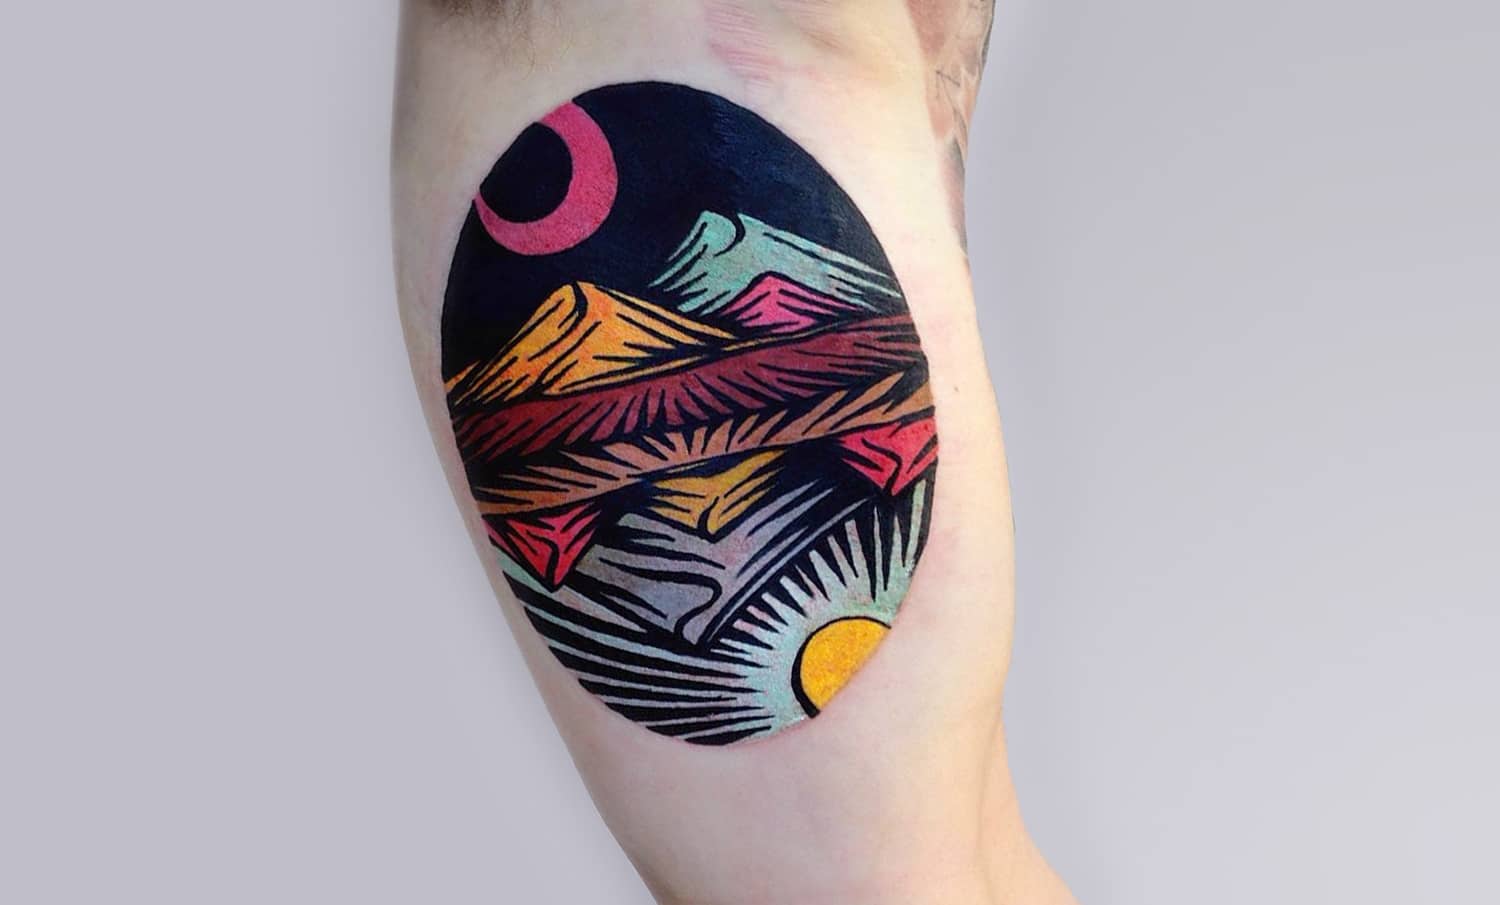 101 Amazing Psychedelic Tattoos Ideas That Will Blow Your Mind! - Outsons